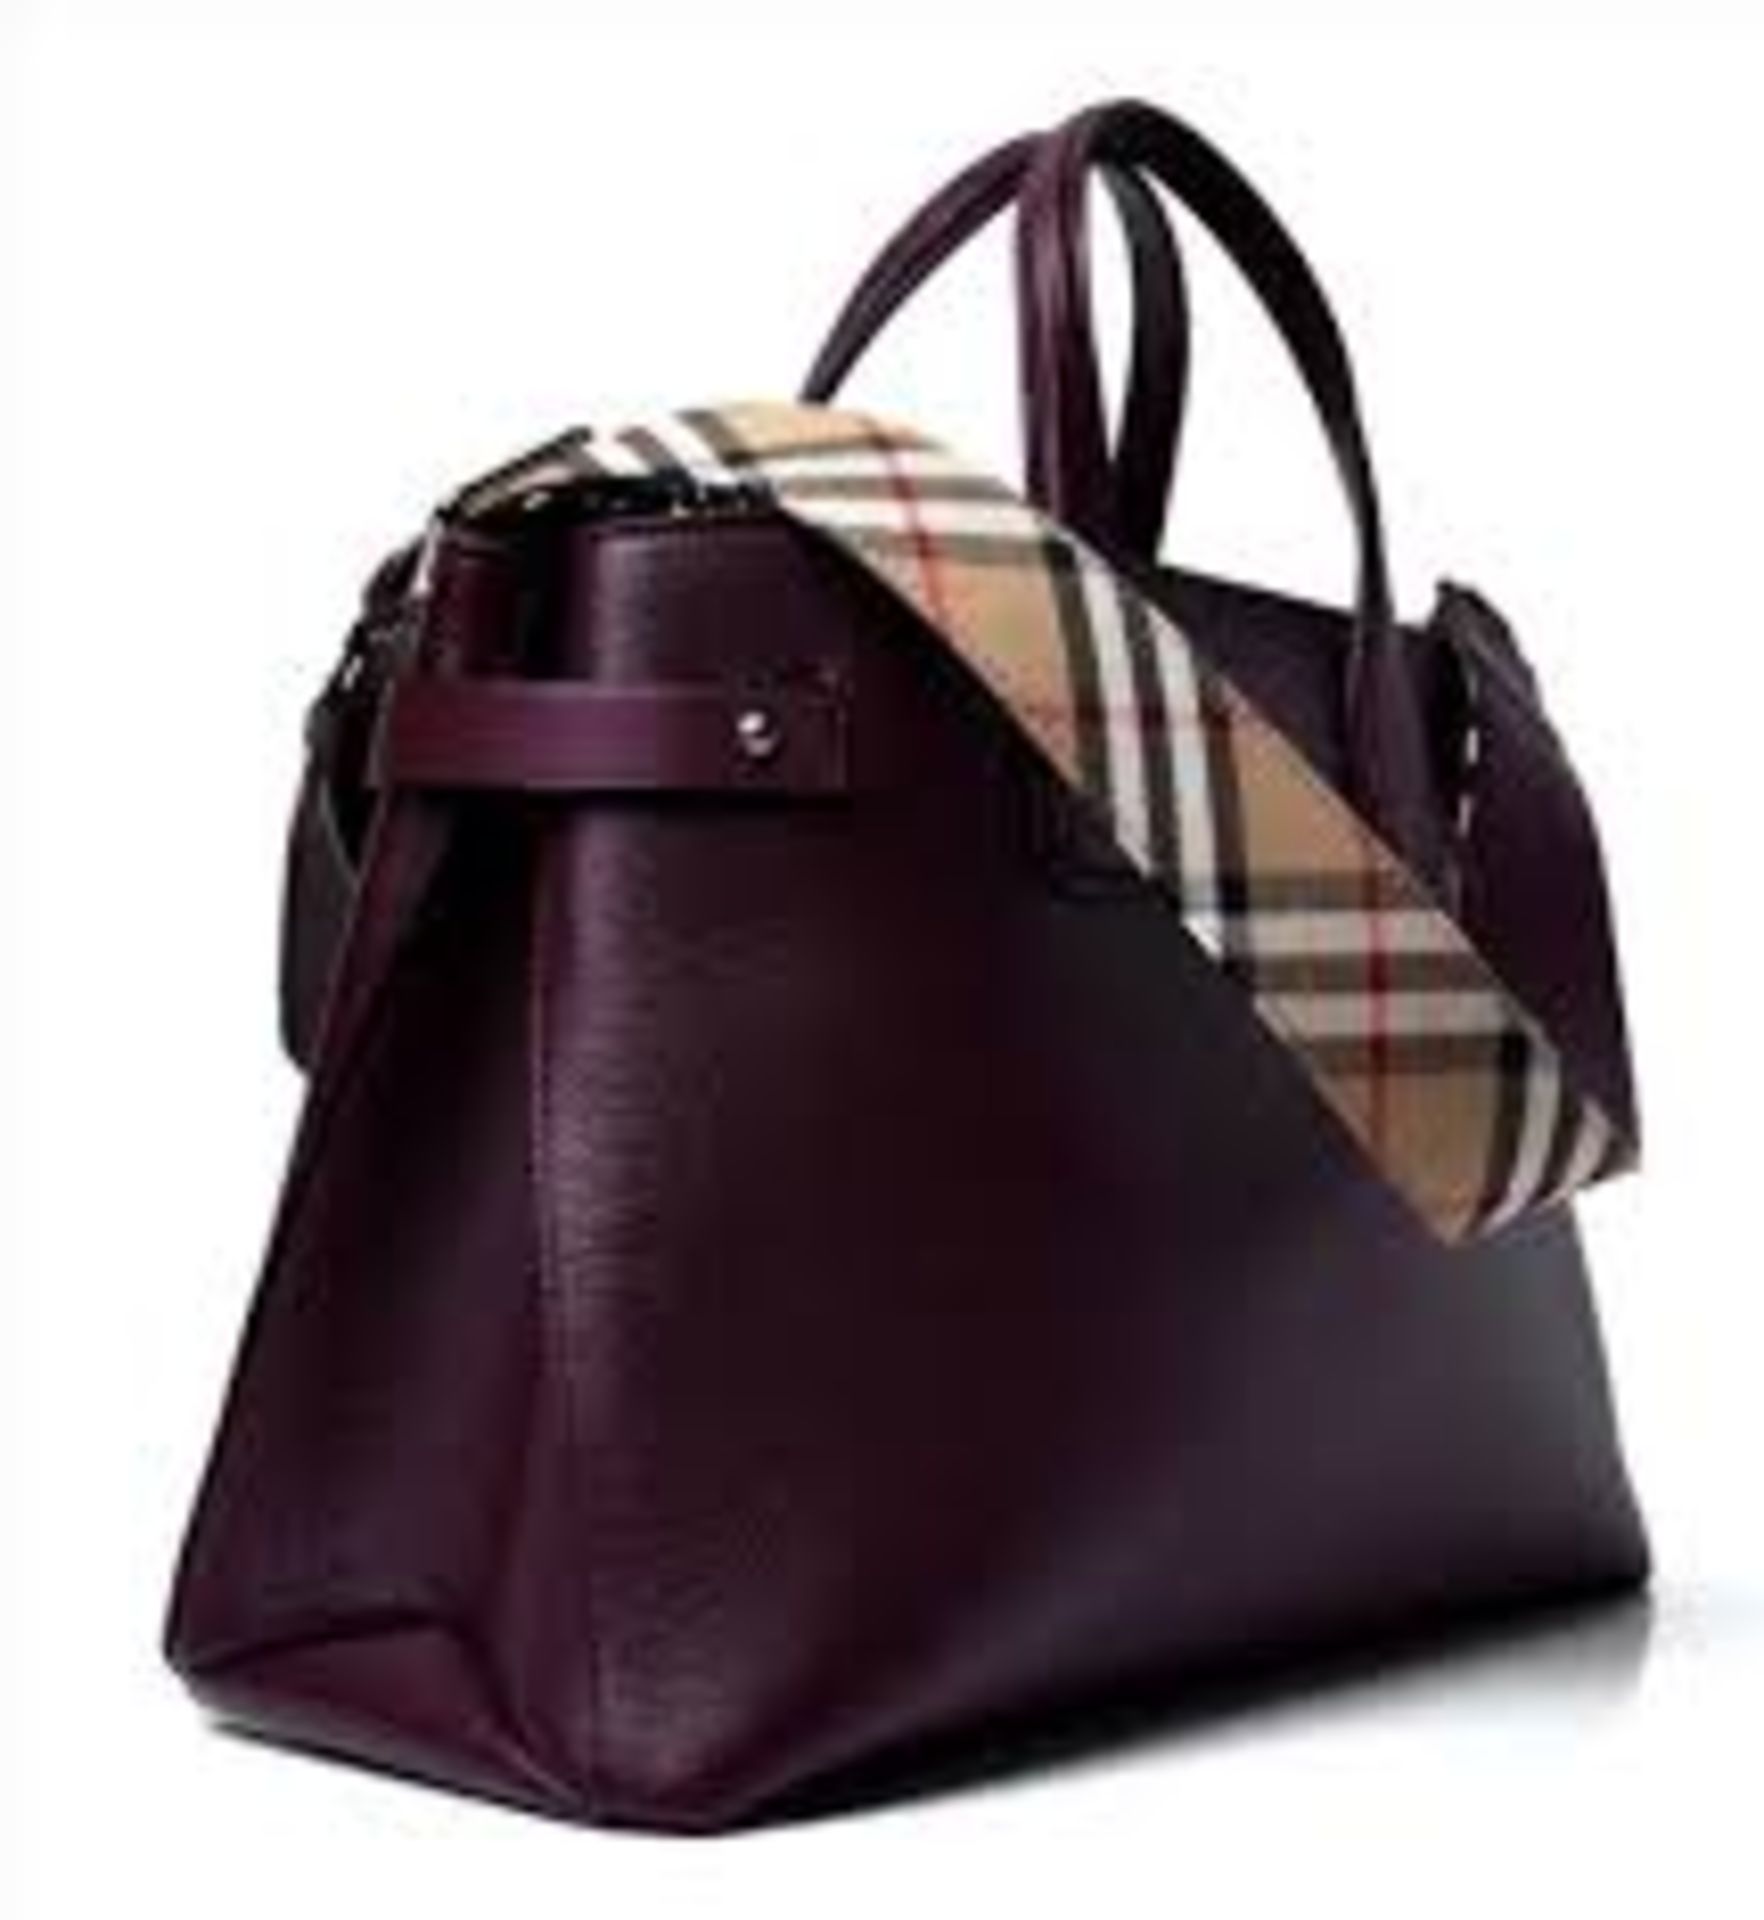 Genuine Burberry Derby Calfskin House Check Banner Tote Mahogany Red - Image 2 of 8